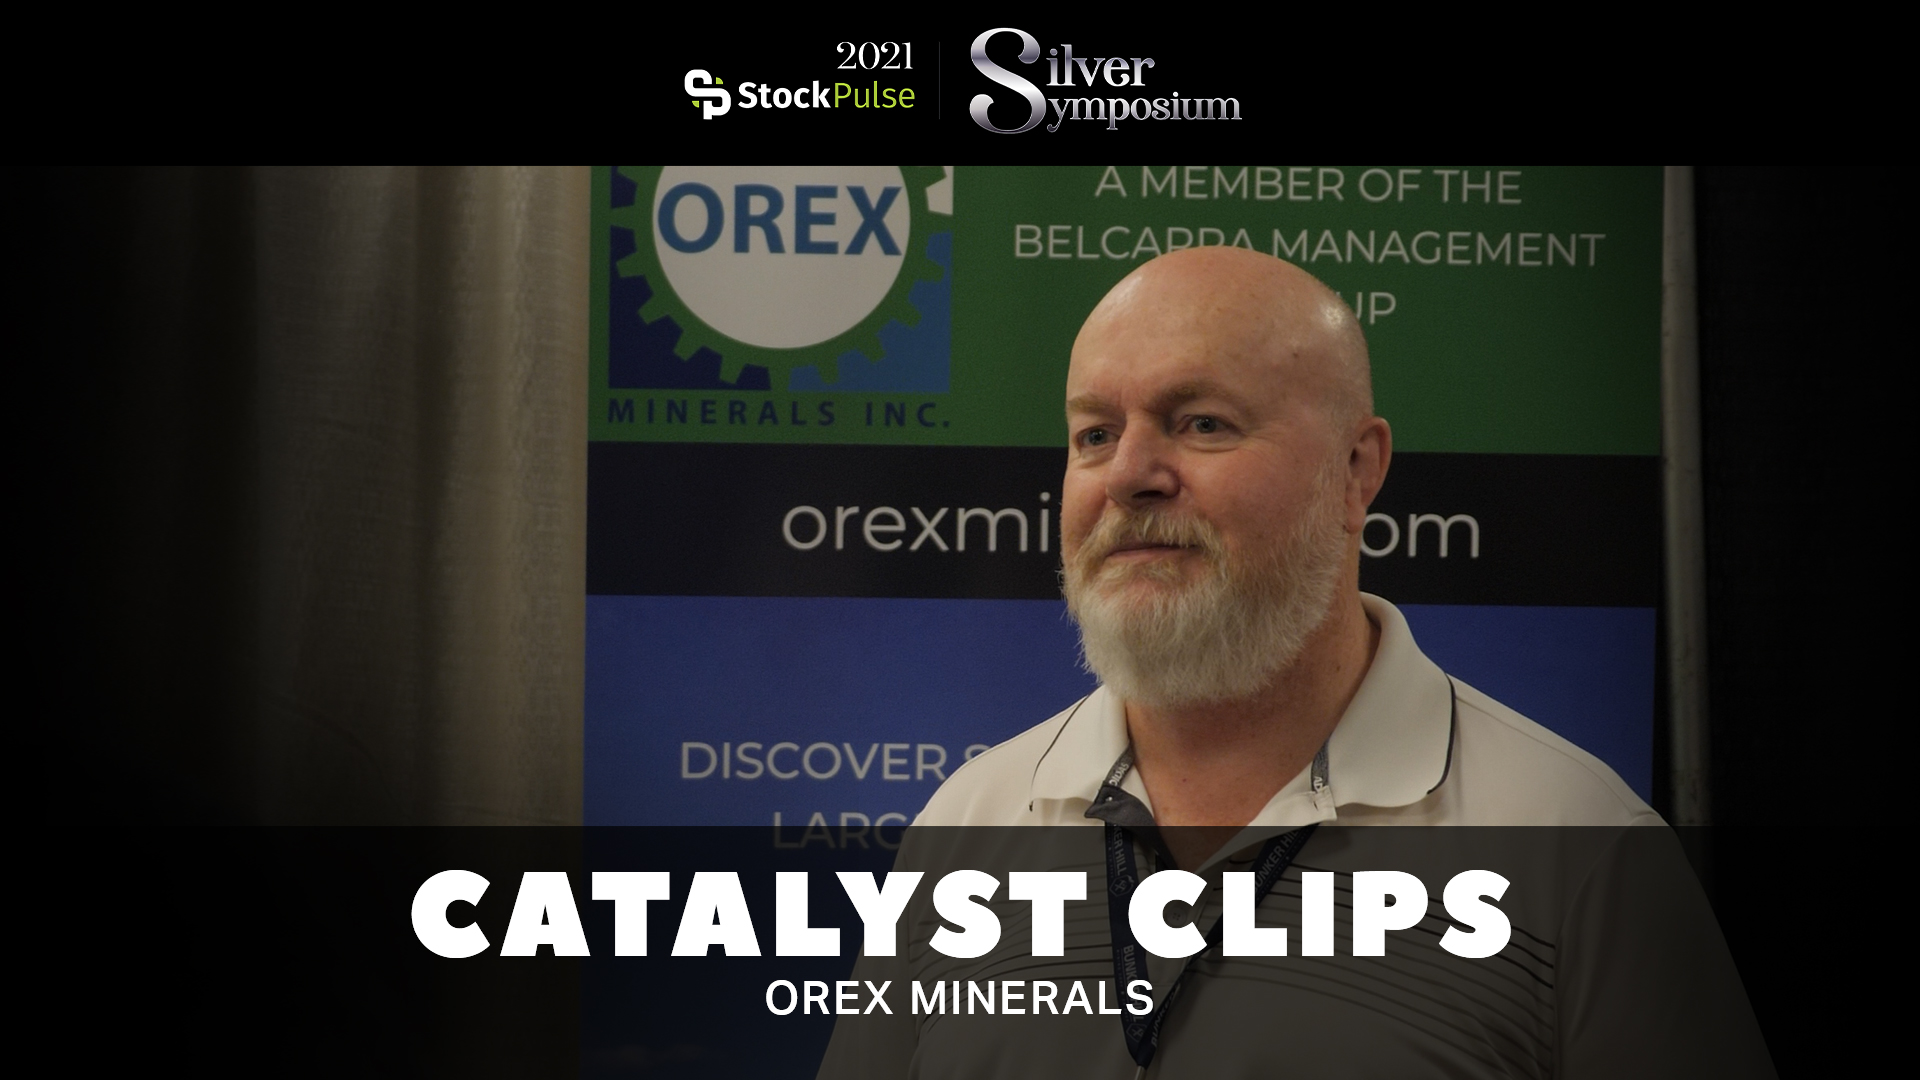 2021 StockPulse Silver Symposium Catalyst Clips | Ben Whiting of Orex Minerals